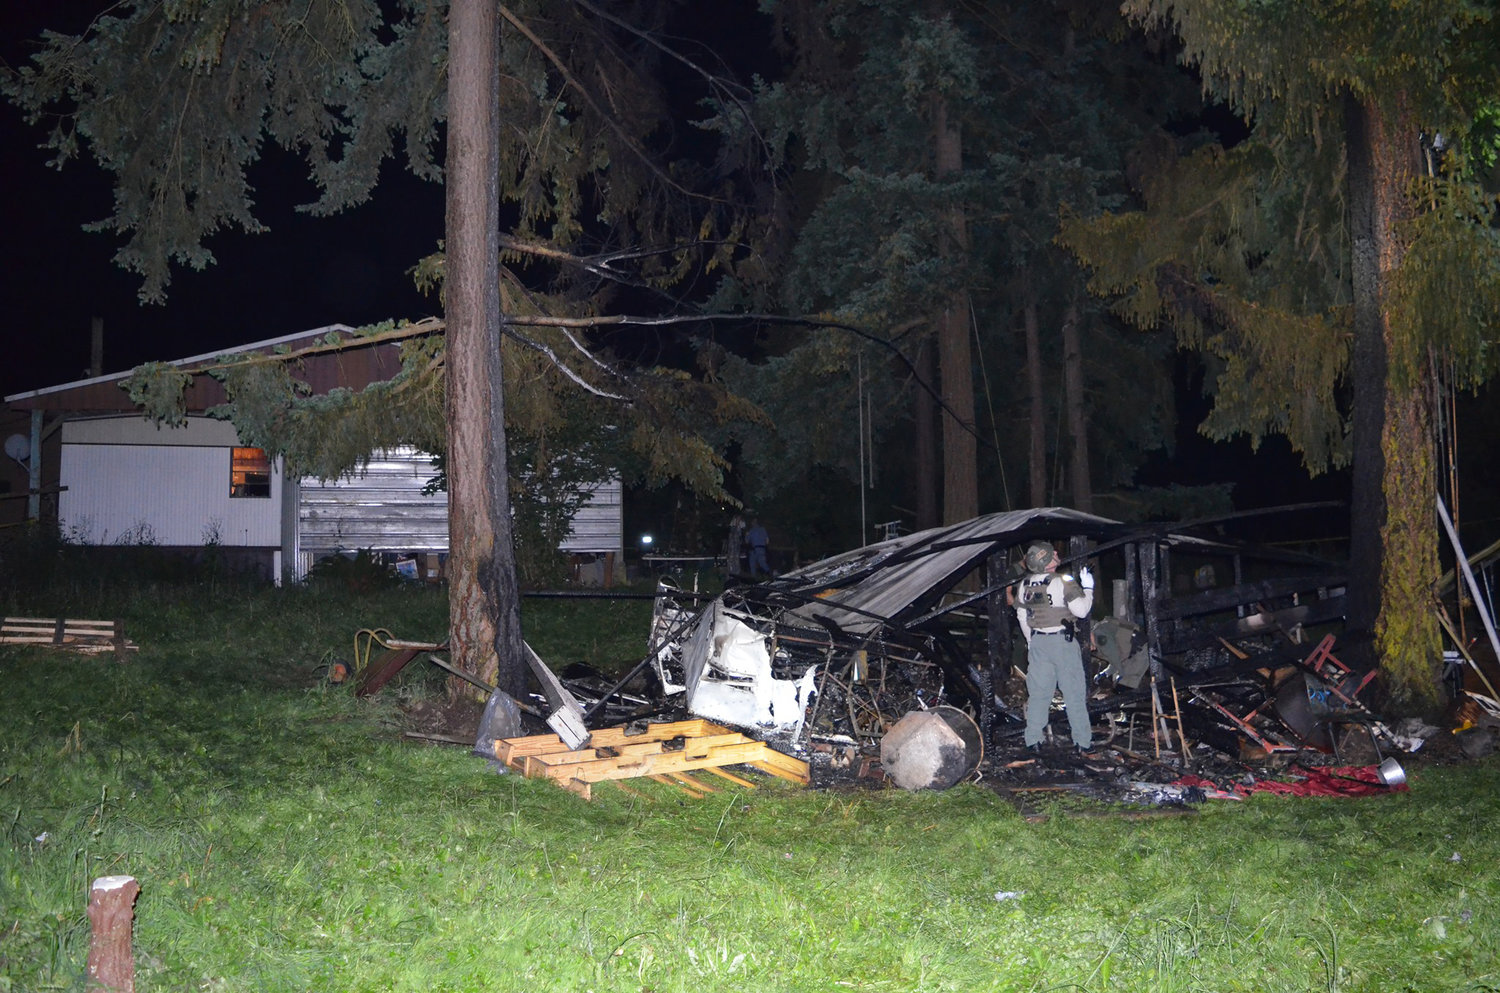 A bomb squad member examines the scene of an explosion in Port Hadlock Tuesday night.